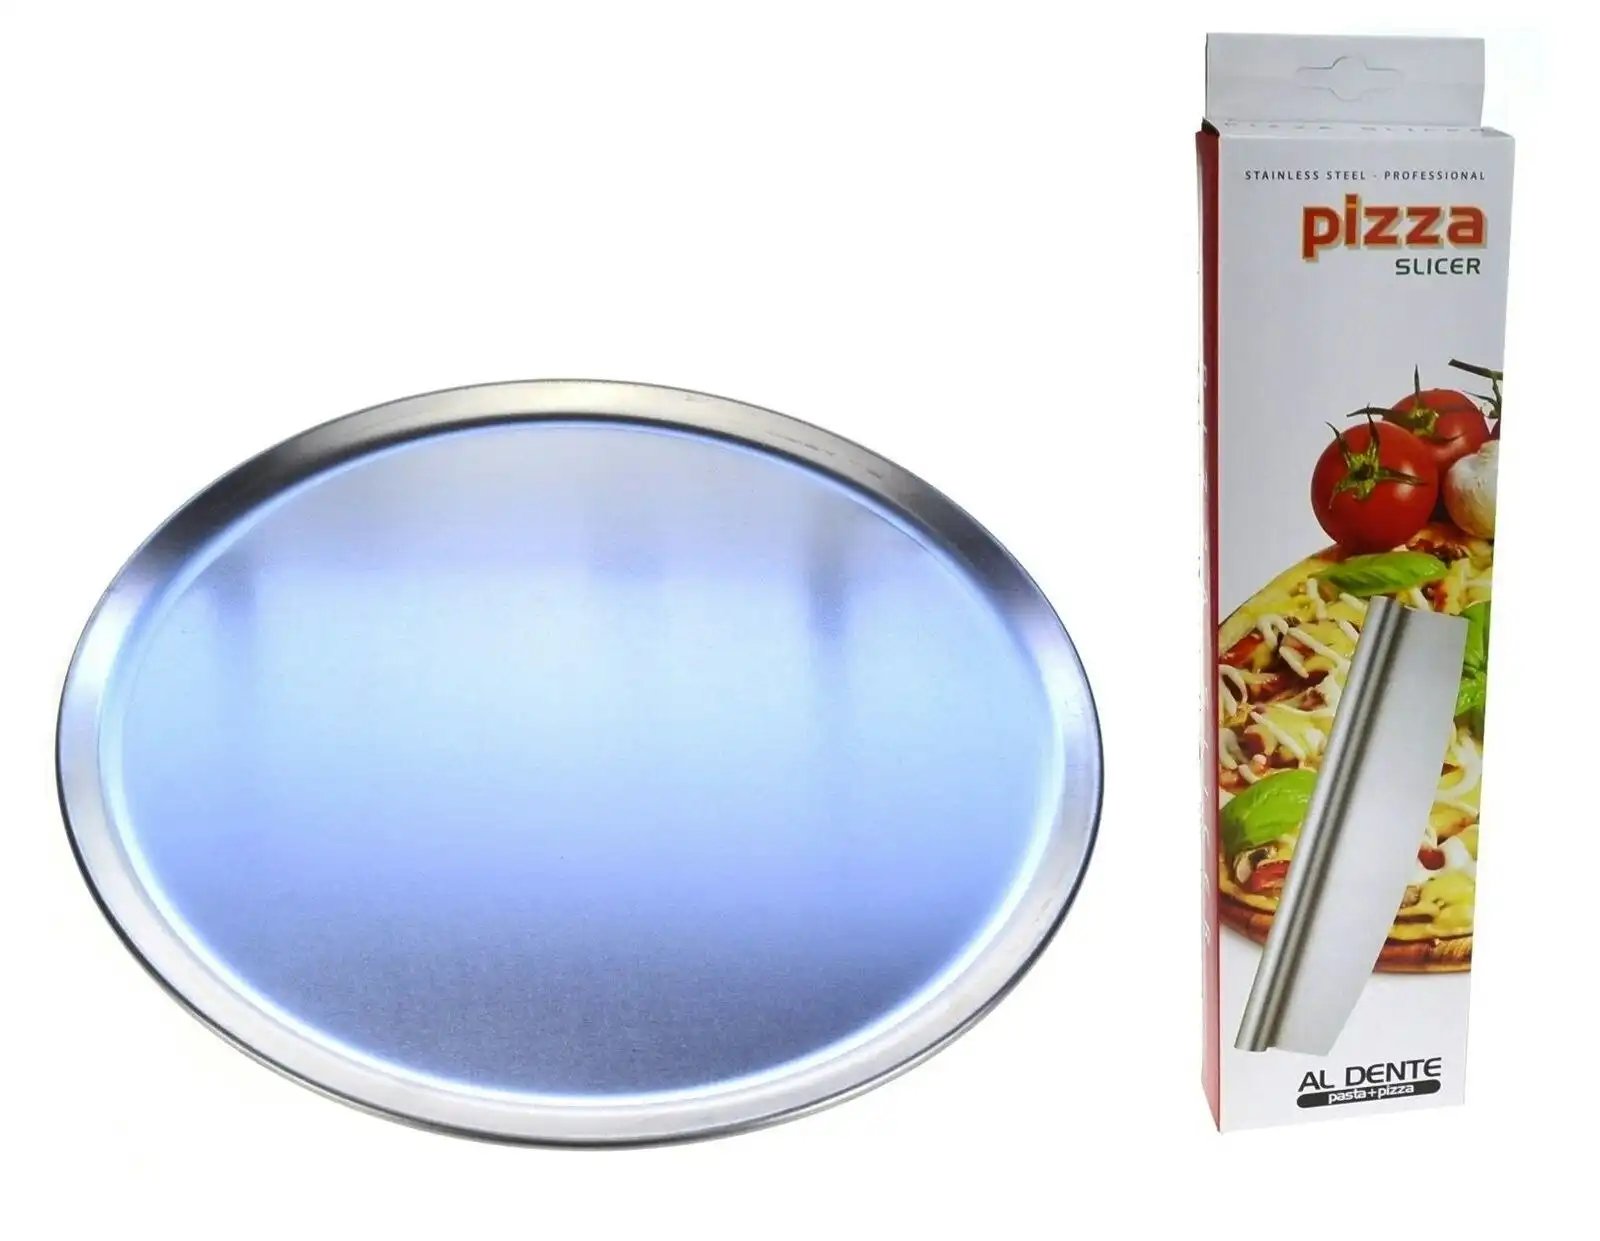 APPETITO PIZZA FLAT PACK - 2 x 300mm PIZZA PLATES and ROCKING PIZZA CUTTER